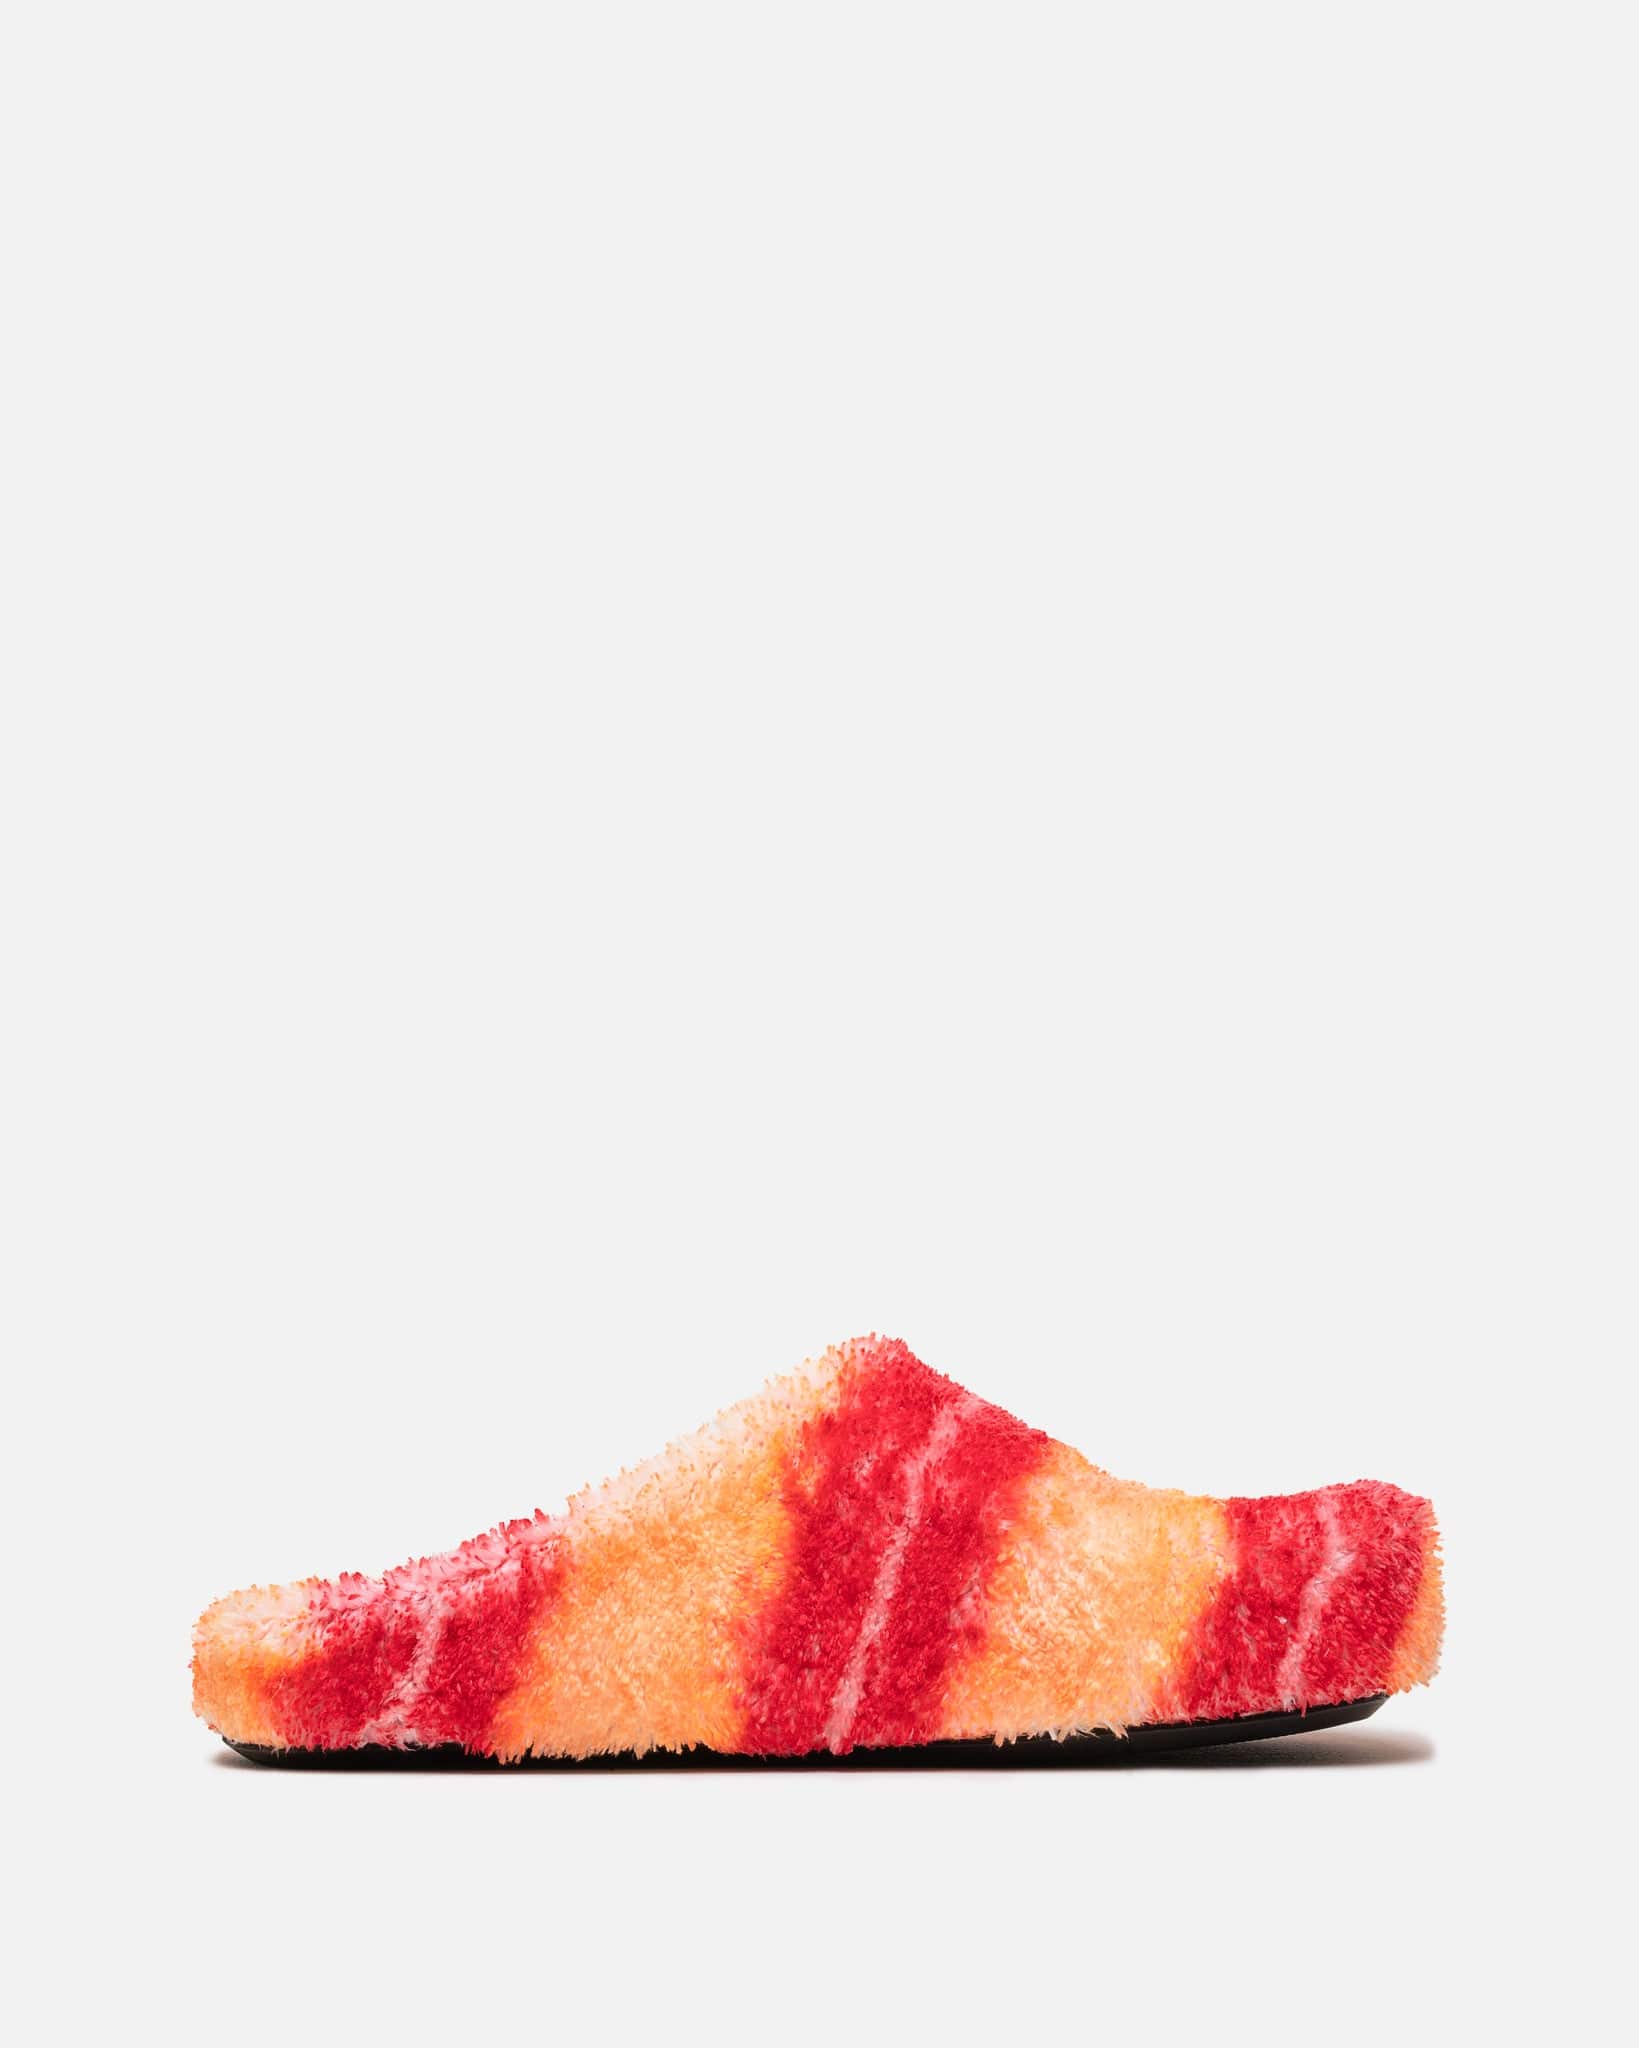 Marni Men's Shoes Abstract Sabot in Red/Orange